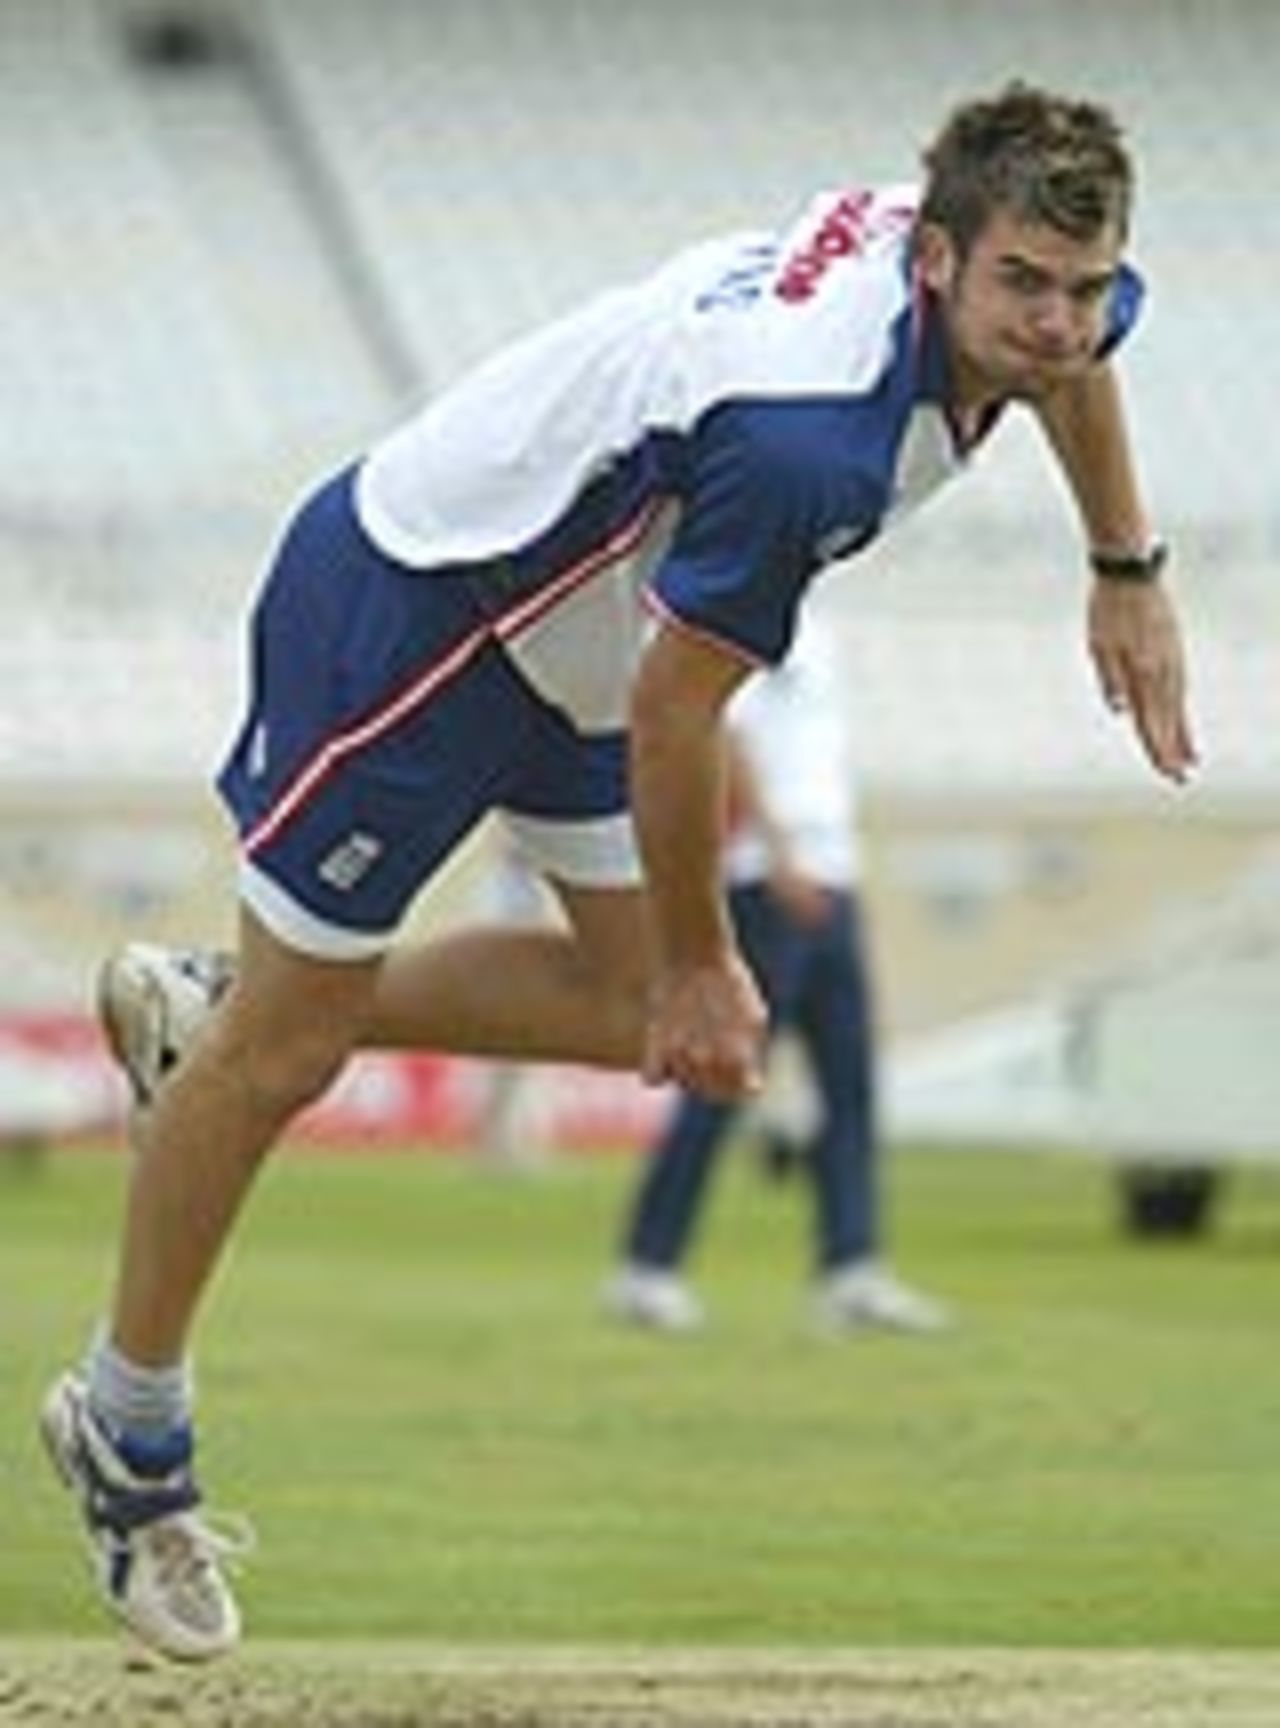 James Anderson bowls in the nets, England v New Zealand, 3rd Test, Trent Bridge, June 9, 2004